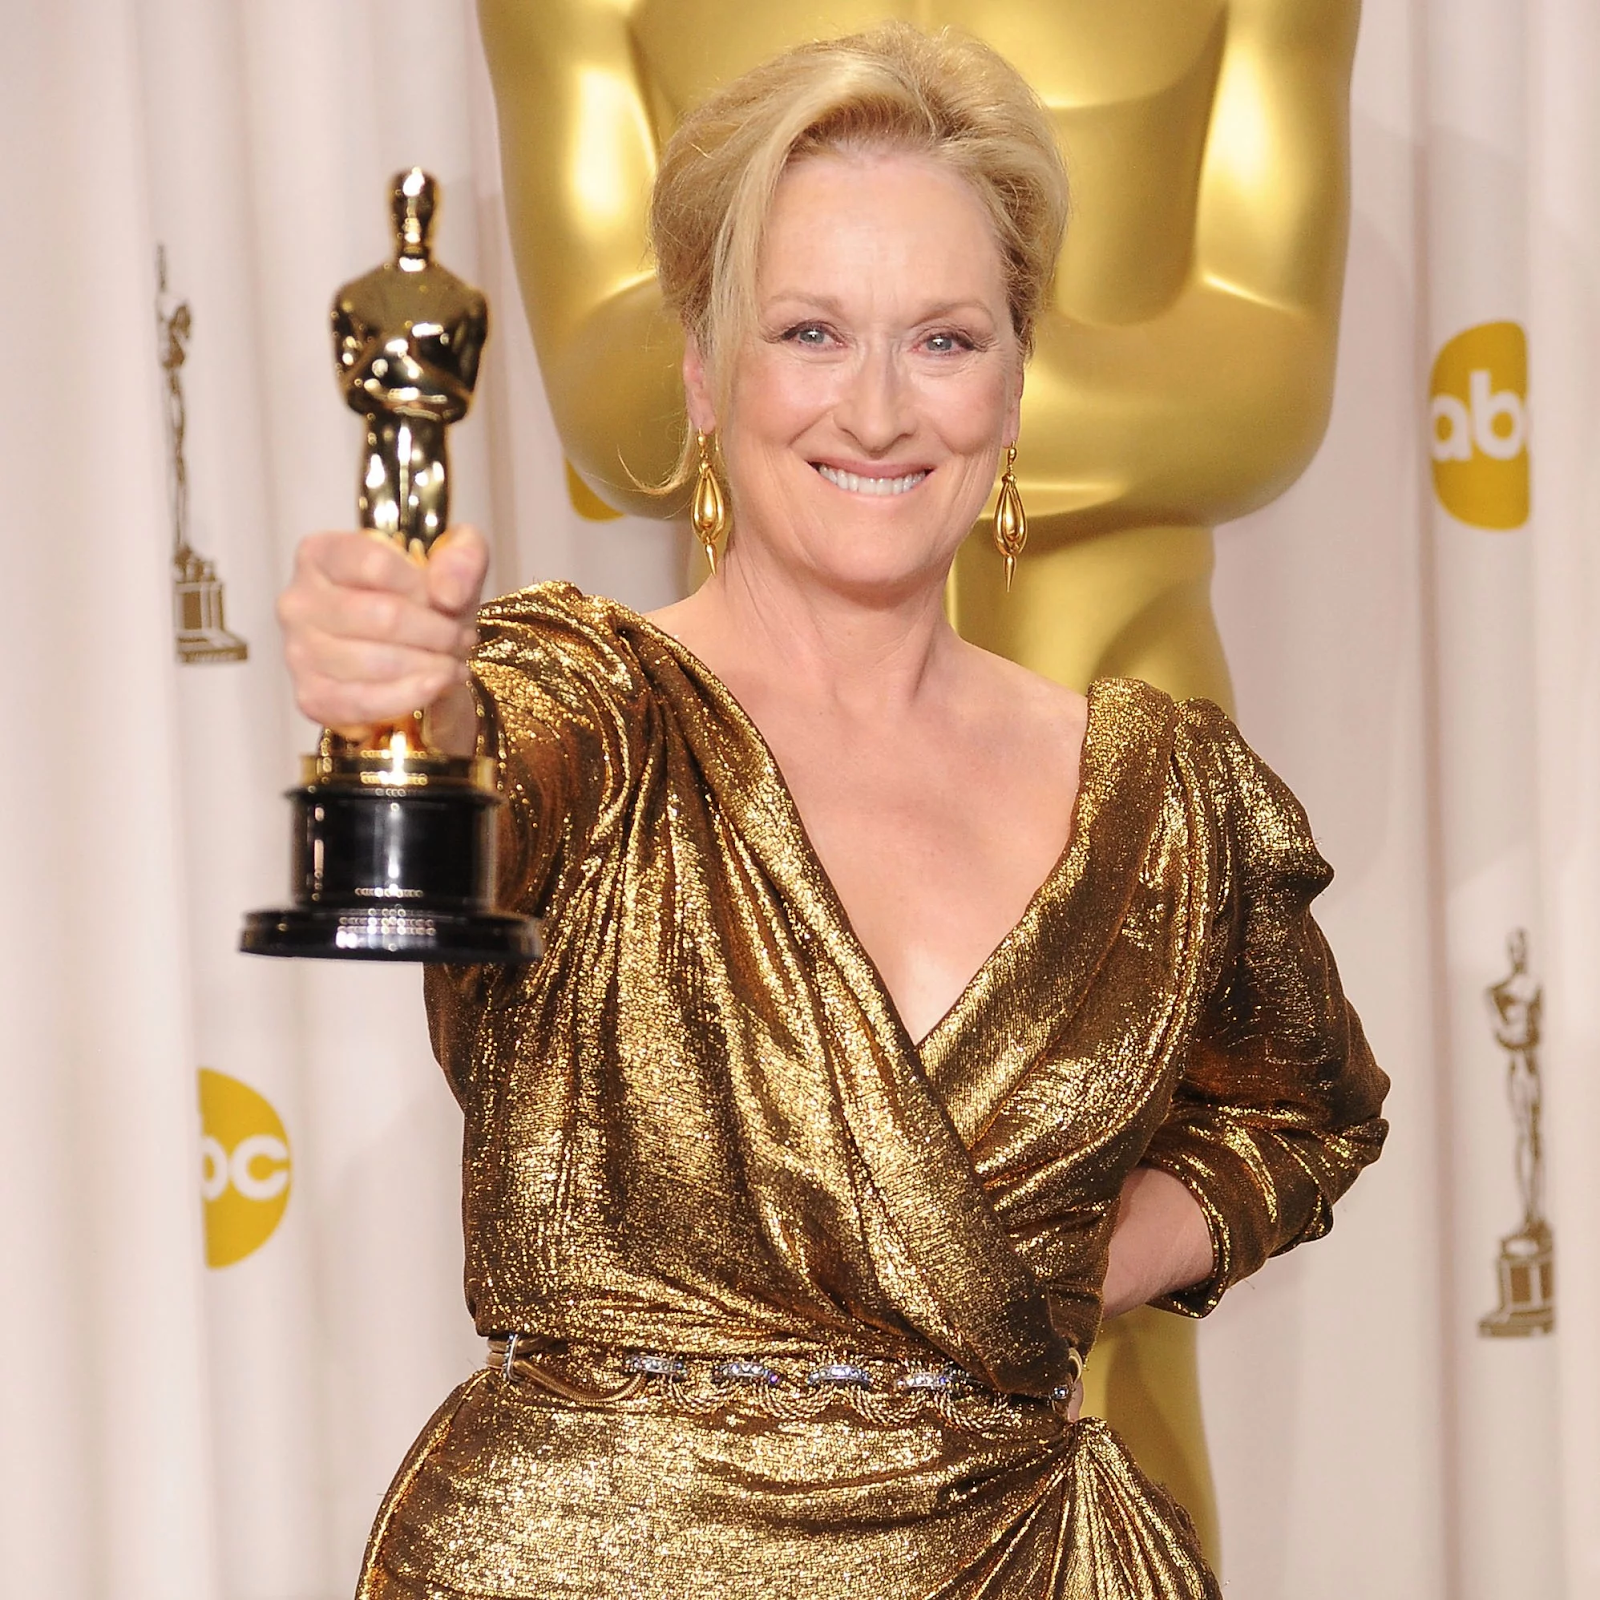 Even Meryl Streep has dealt with Impostor Syndrome, and she is the most-nominated Academy Award winner in movie history! Blog via Come Alive Co, a Brand Story Copywriting Studio by Che Elizaga Castro